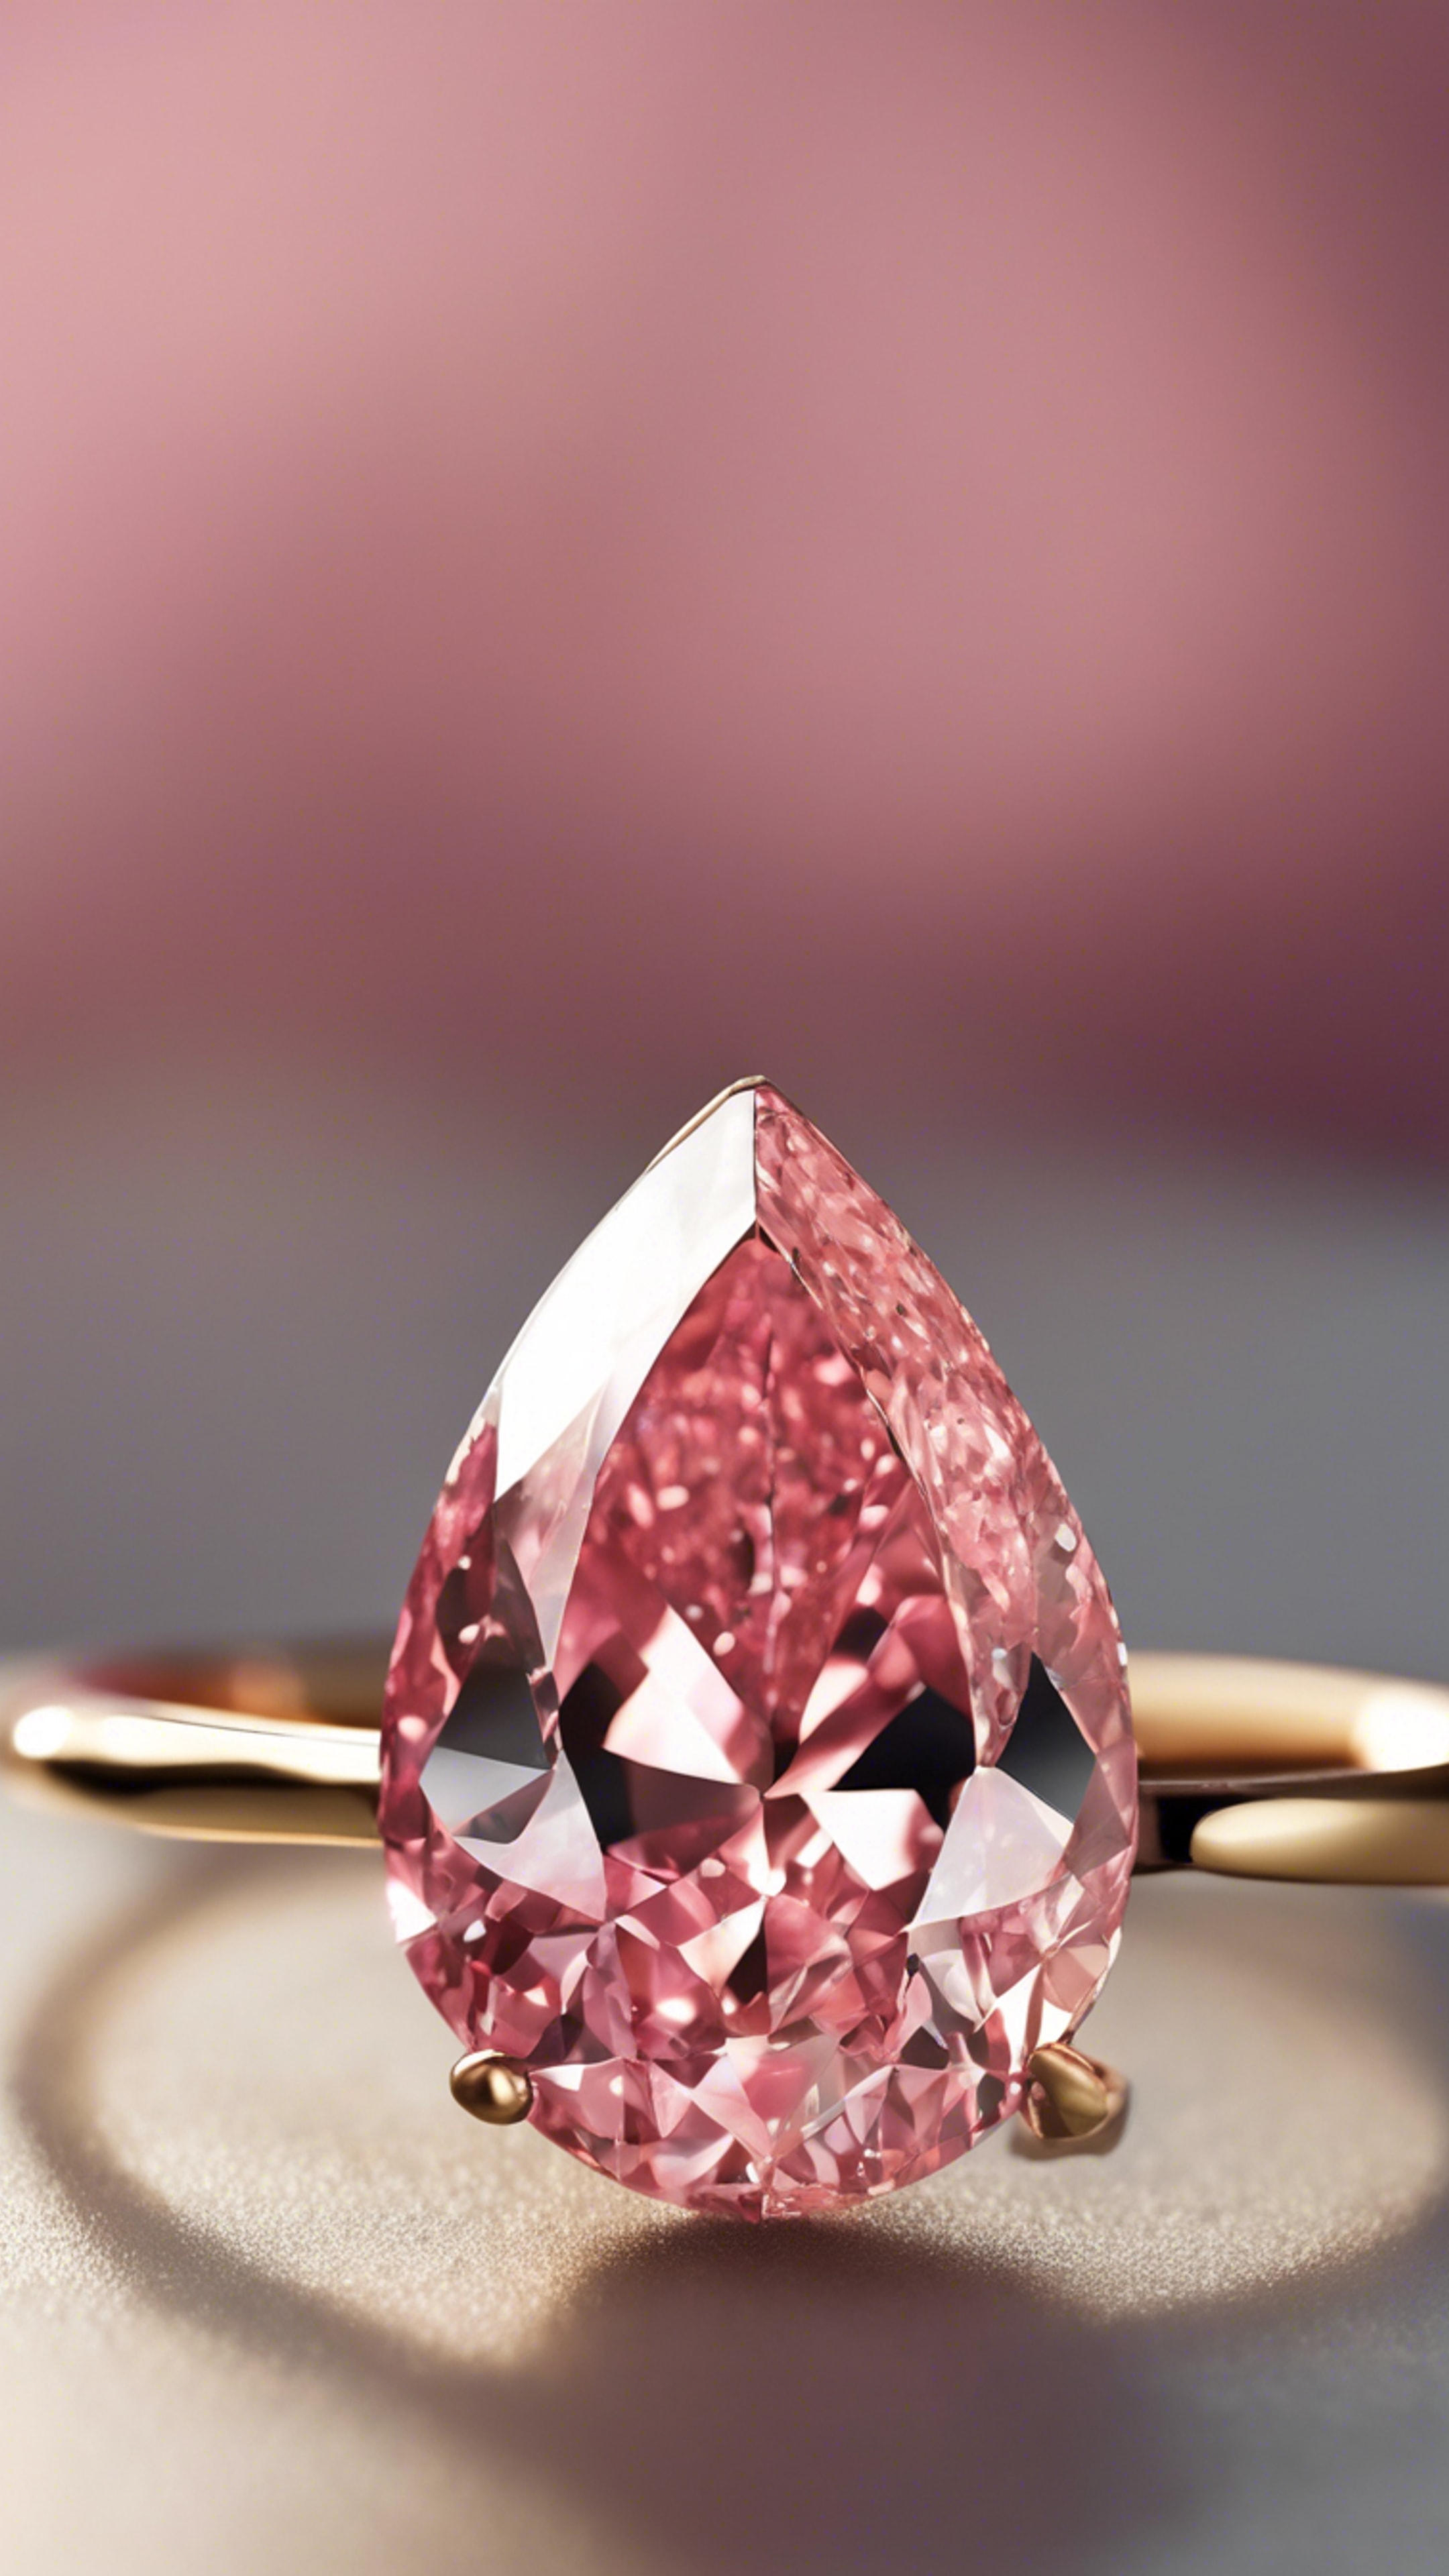 A close-up of a pink pear-shaped diamond on a simple gold band. Kertas dinding[930f75676b4b4a58983f]